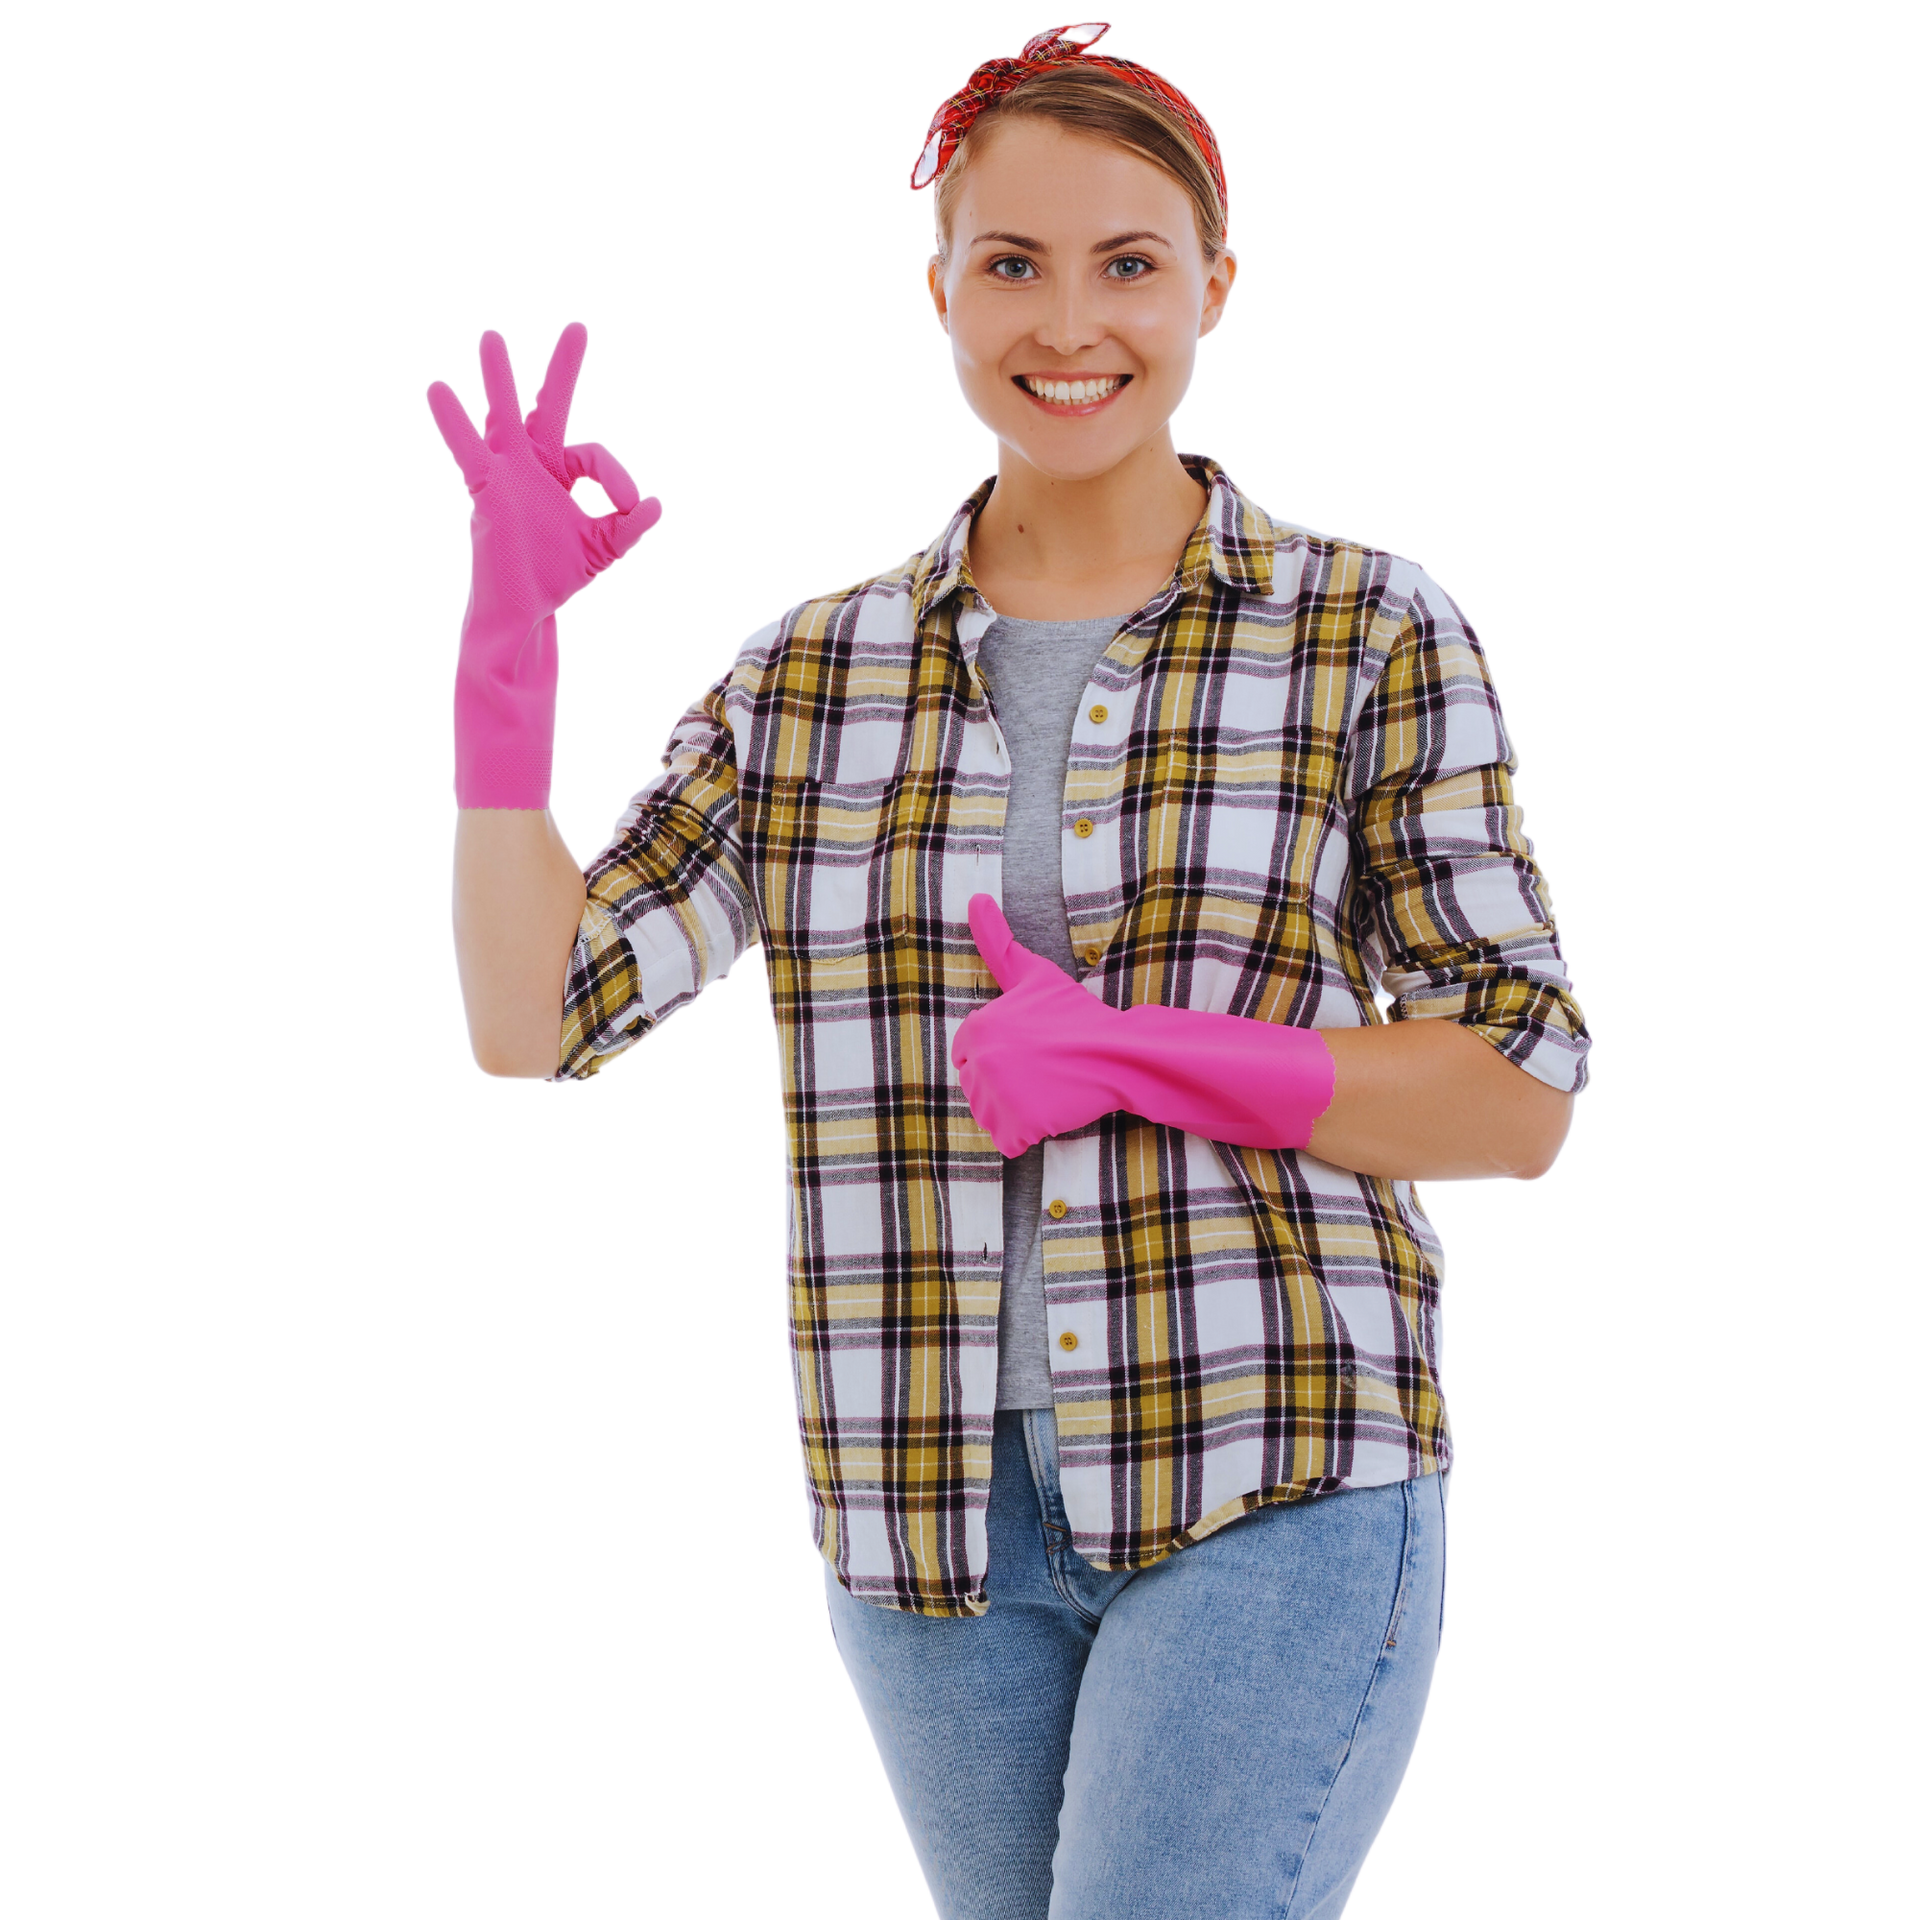 A female house cleaner expressing approval with an 'OK' gesture and thumbs-up.